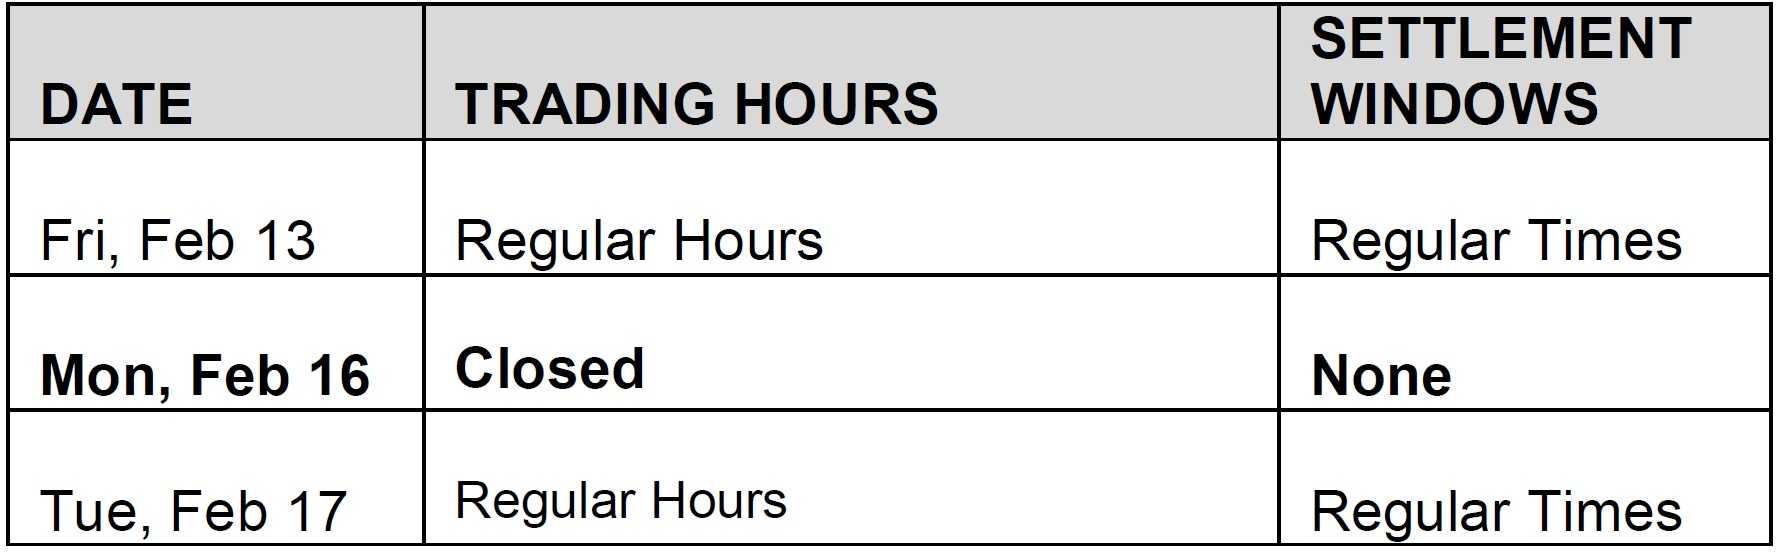 Ice brent futures trading hours and also anzac day opening times qld